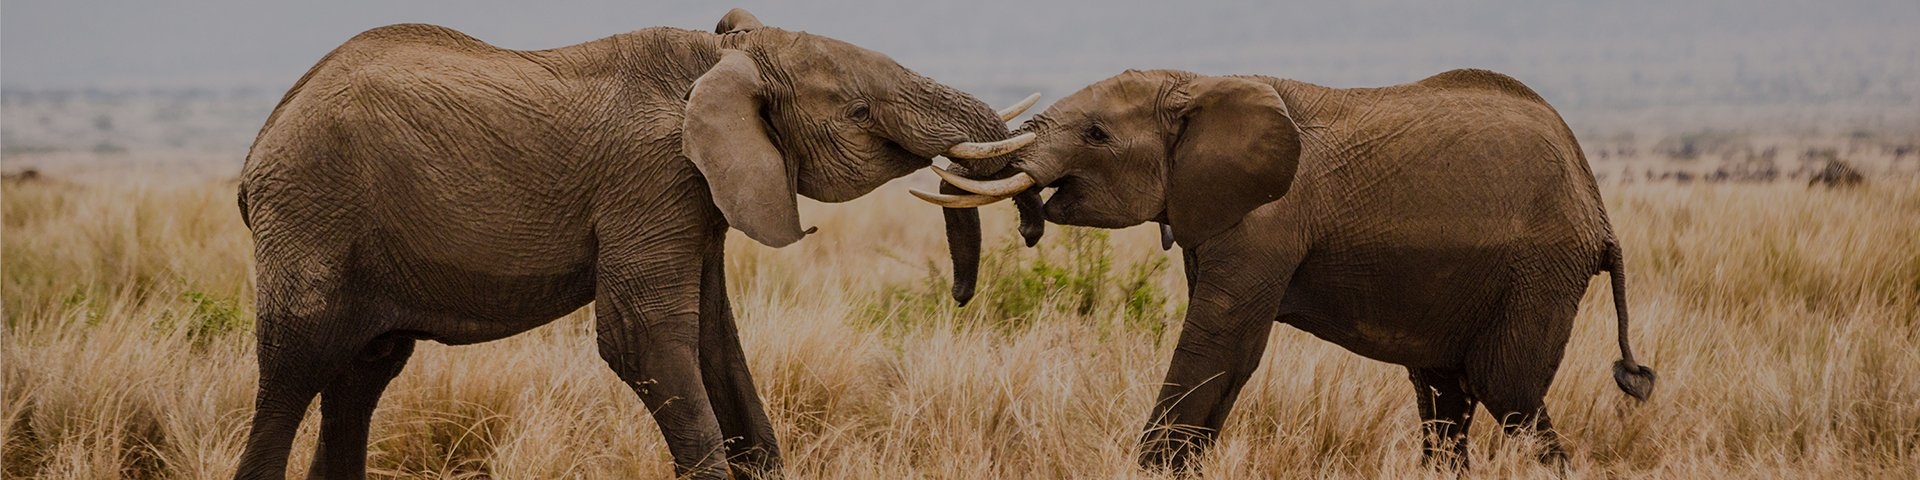 Two elephants face each other and cross trunks.